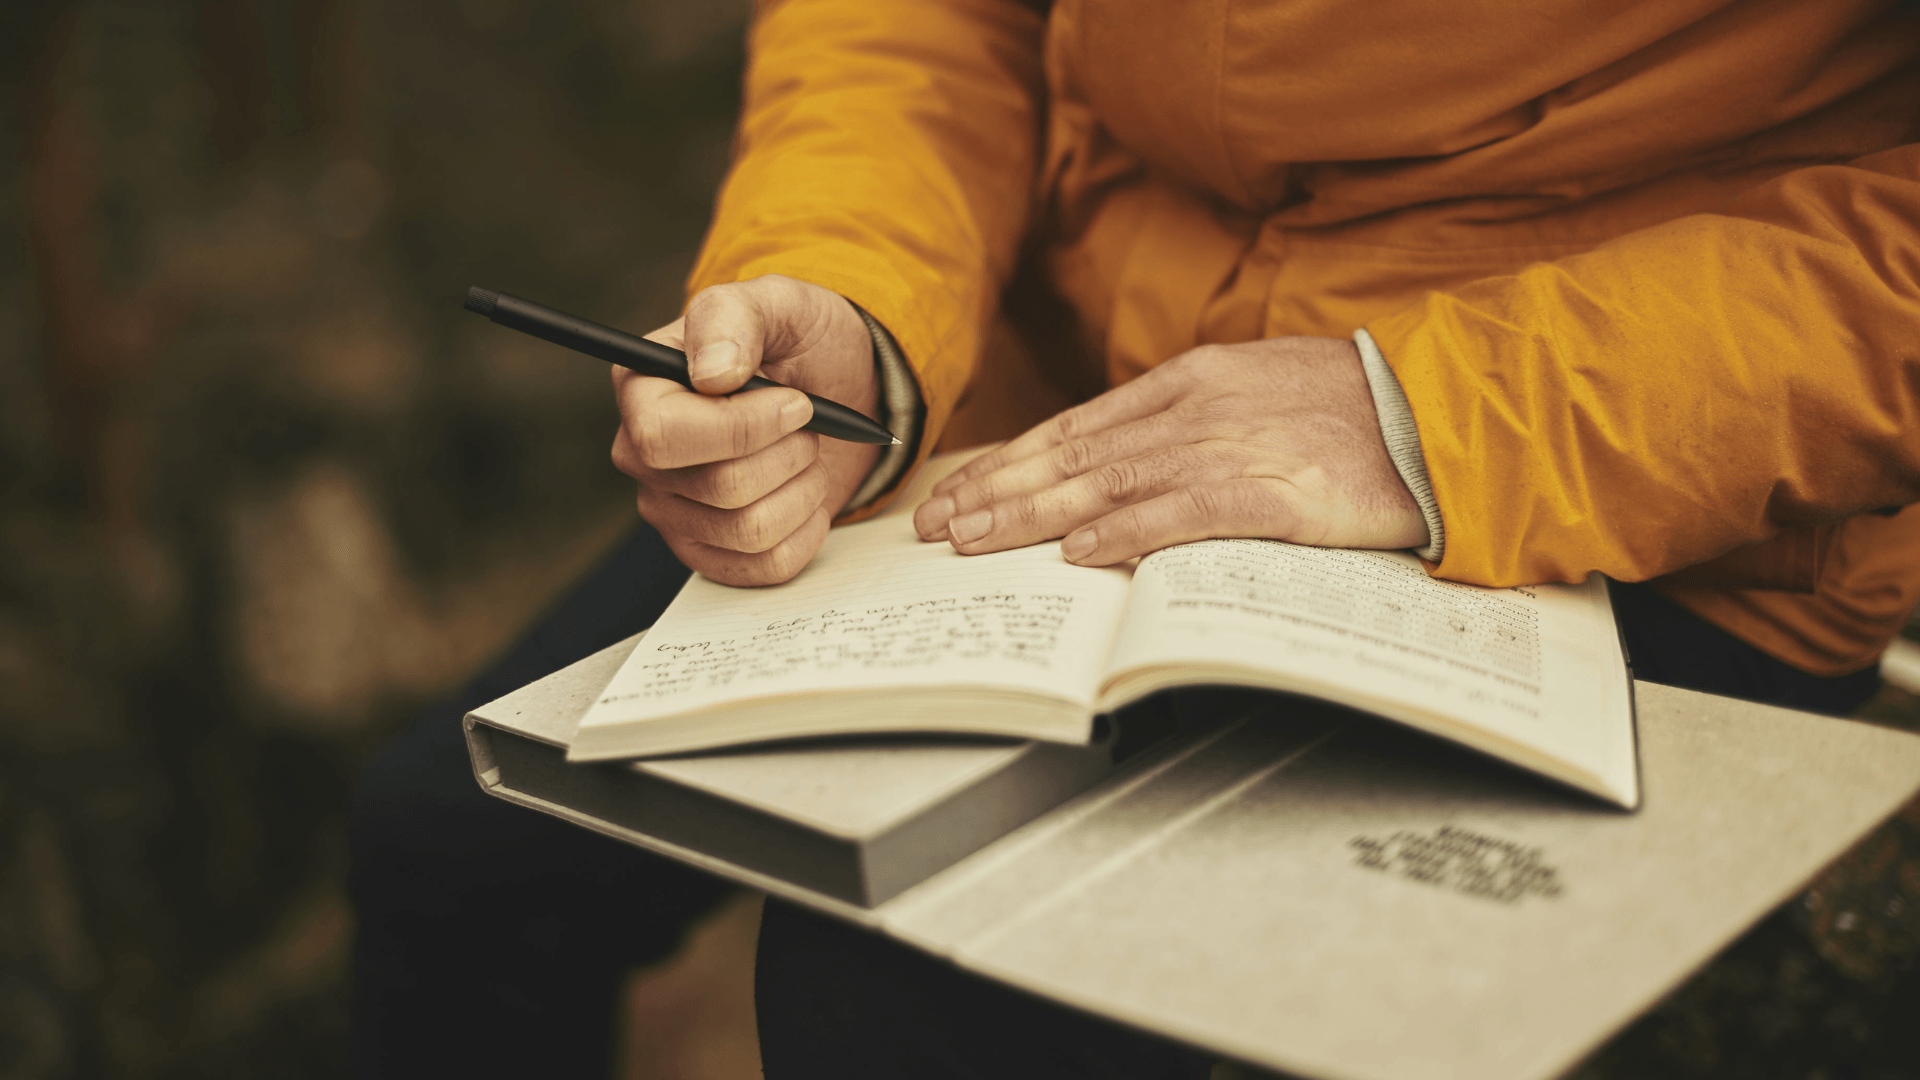 man with orange jacket, pen in the right hand, writing in his journal